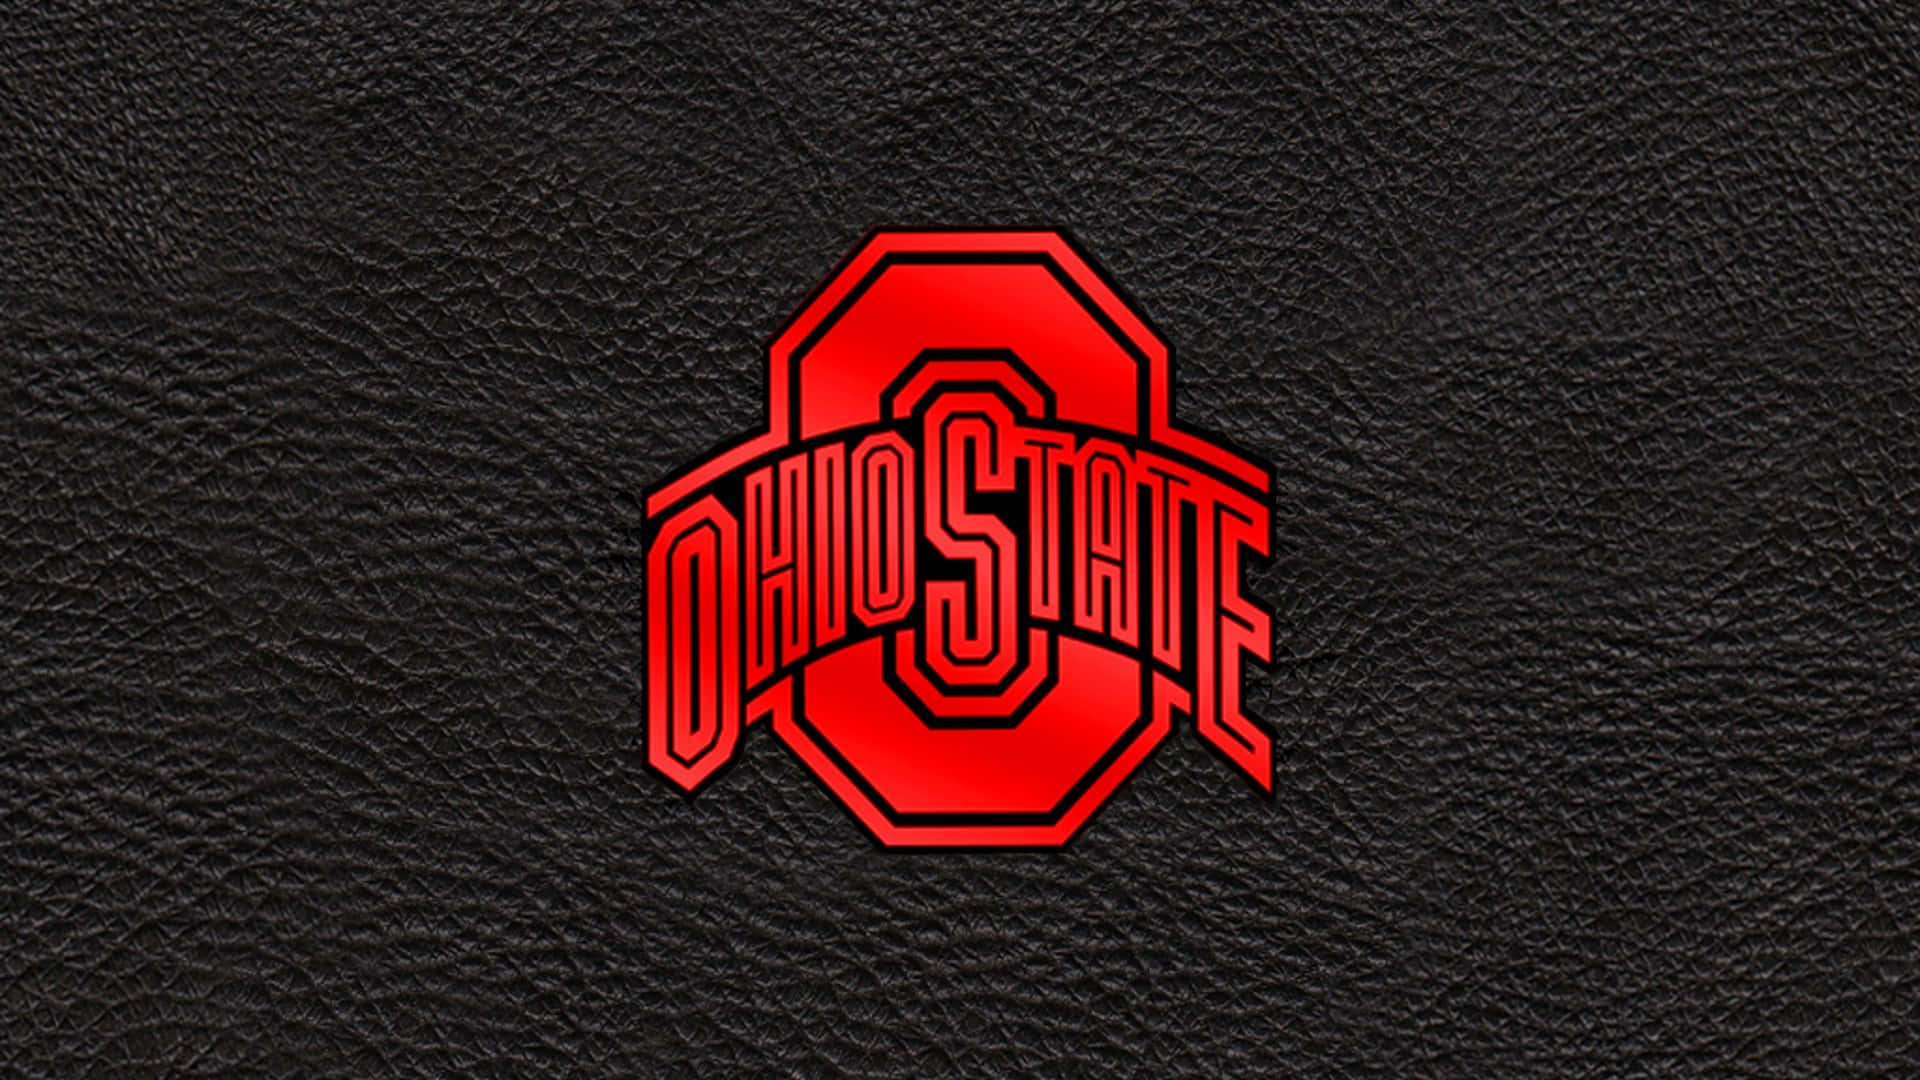 Ohio State Logo On A Black Leather Background Wallpaper